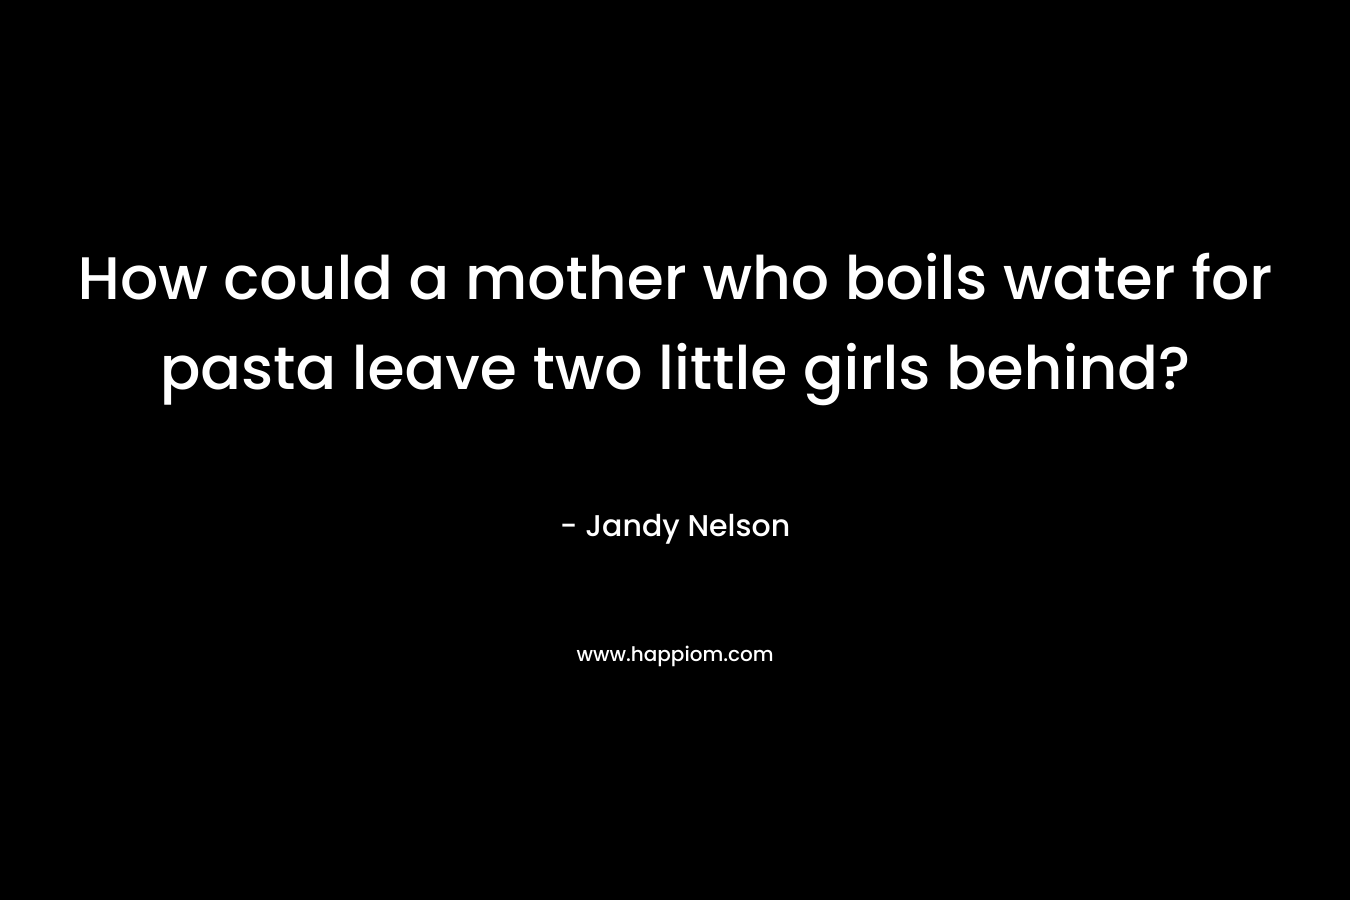 How could a mother who boils water for pasta leave two little girls behind? – Jandy Nelson